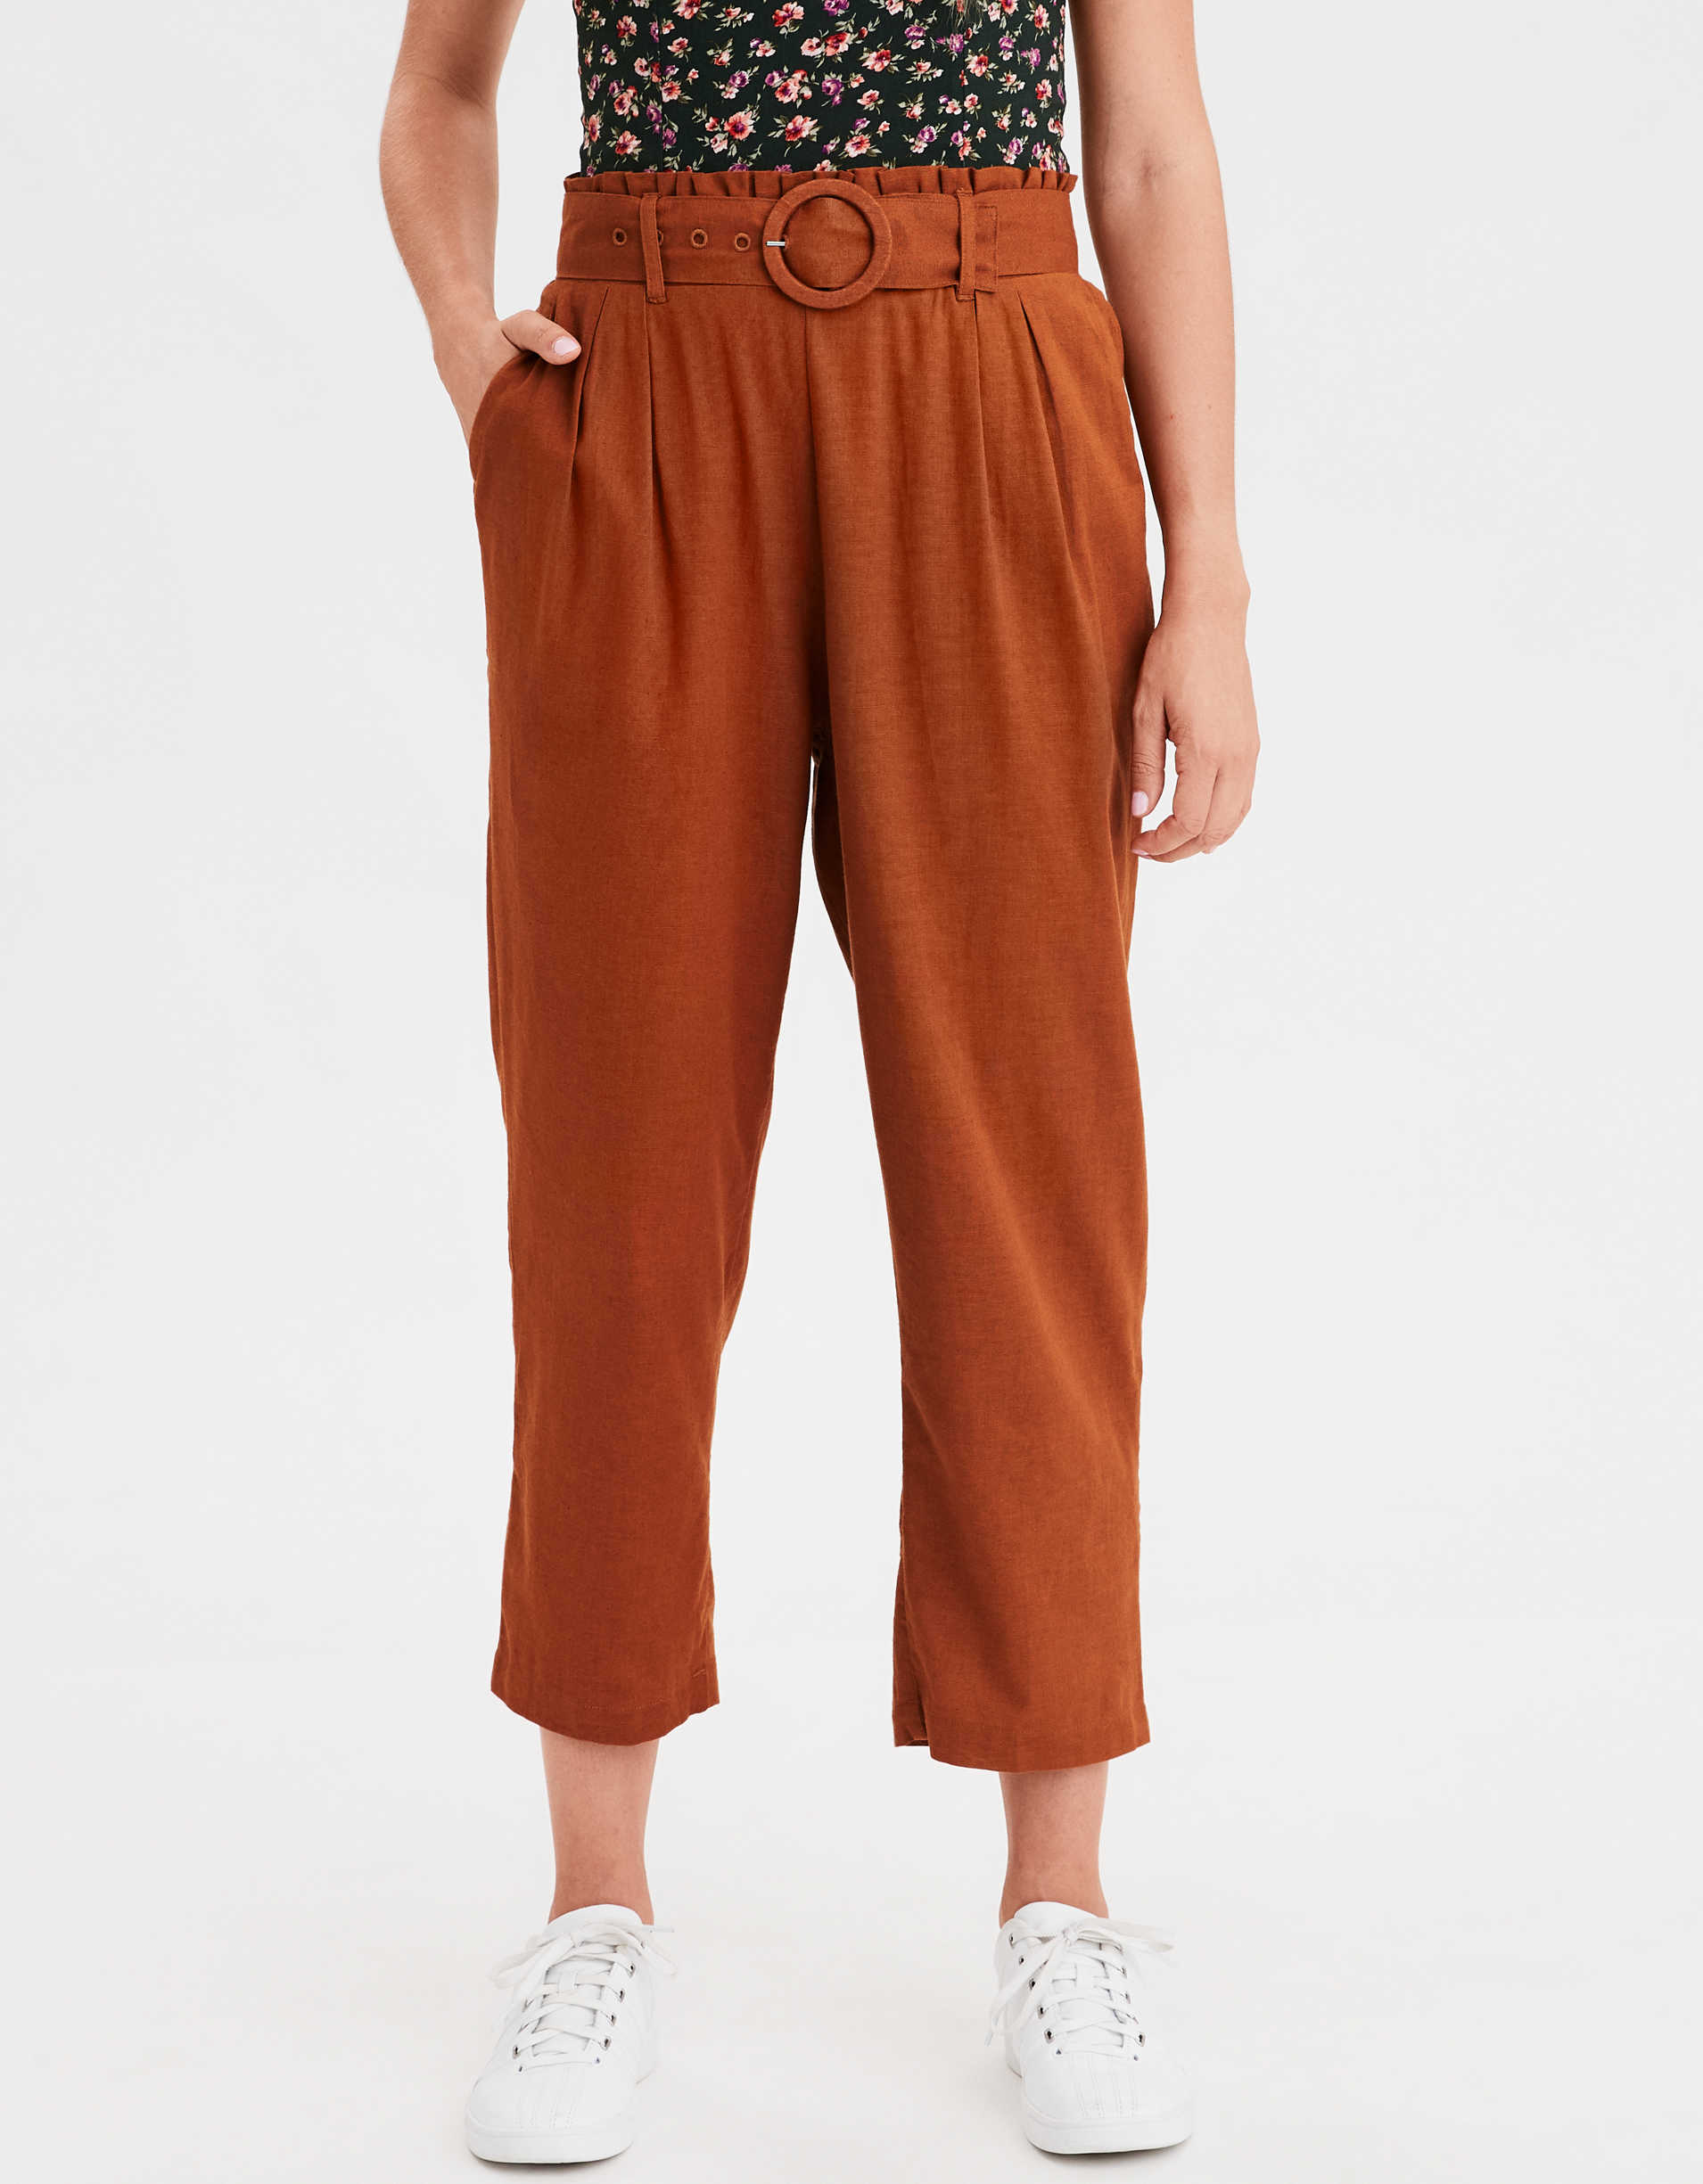 AE High-Waisted Tapered Leg Pant